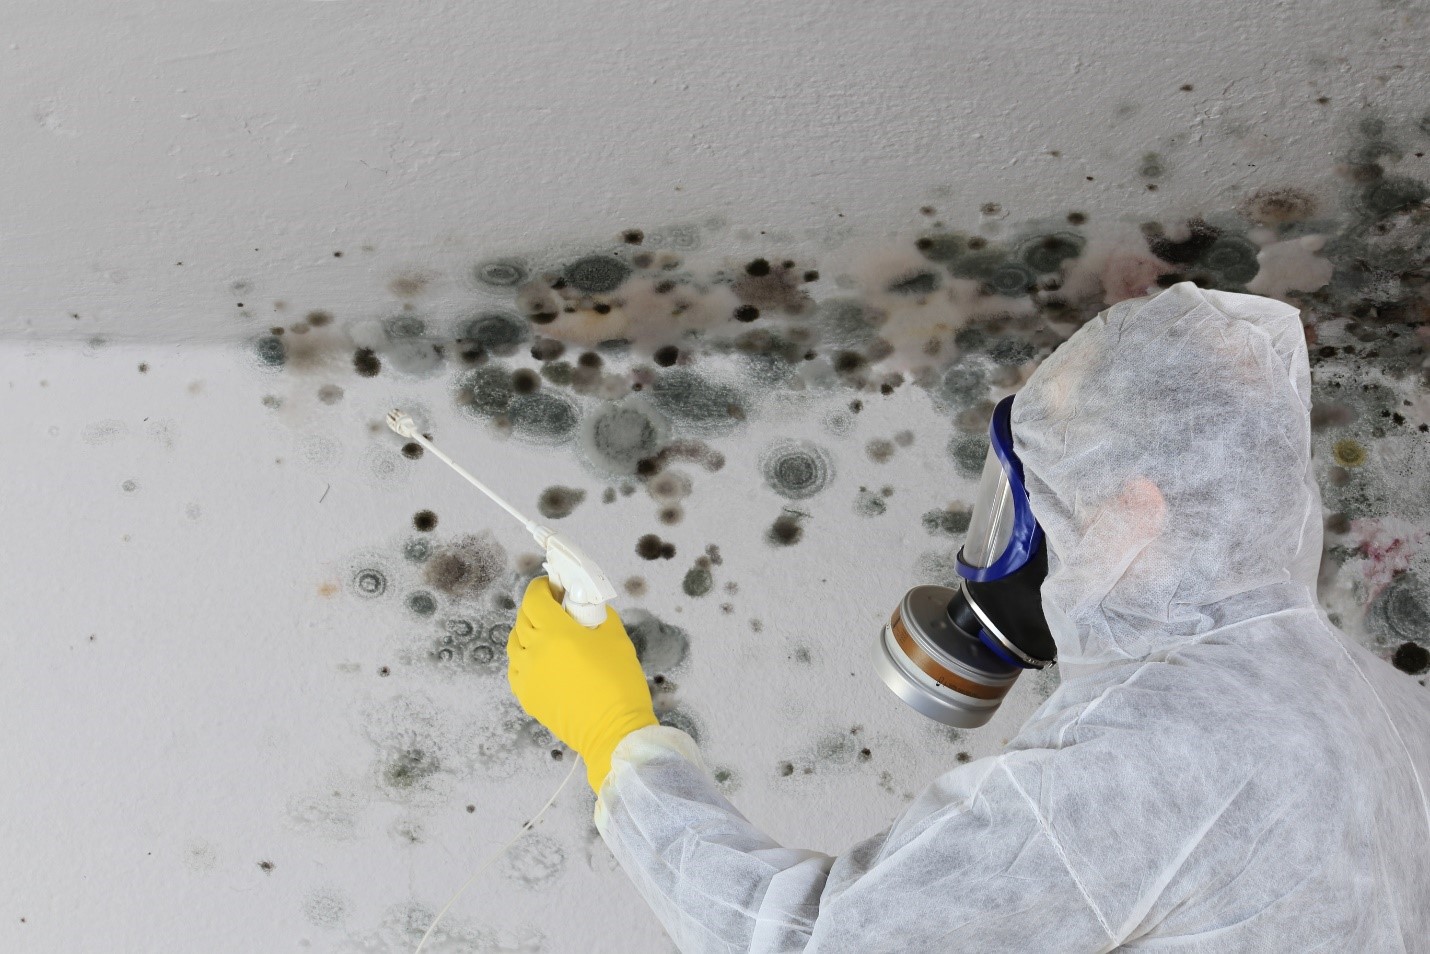 Residential Mold Removal